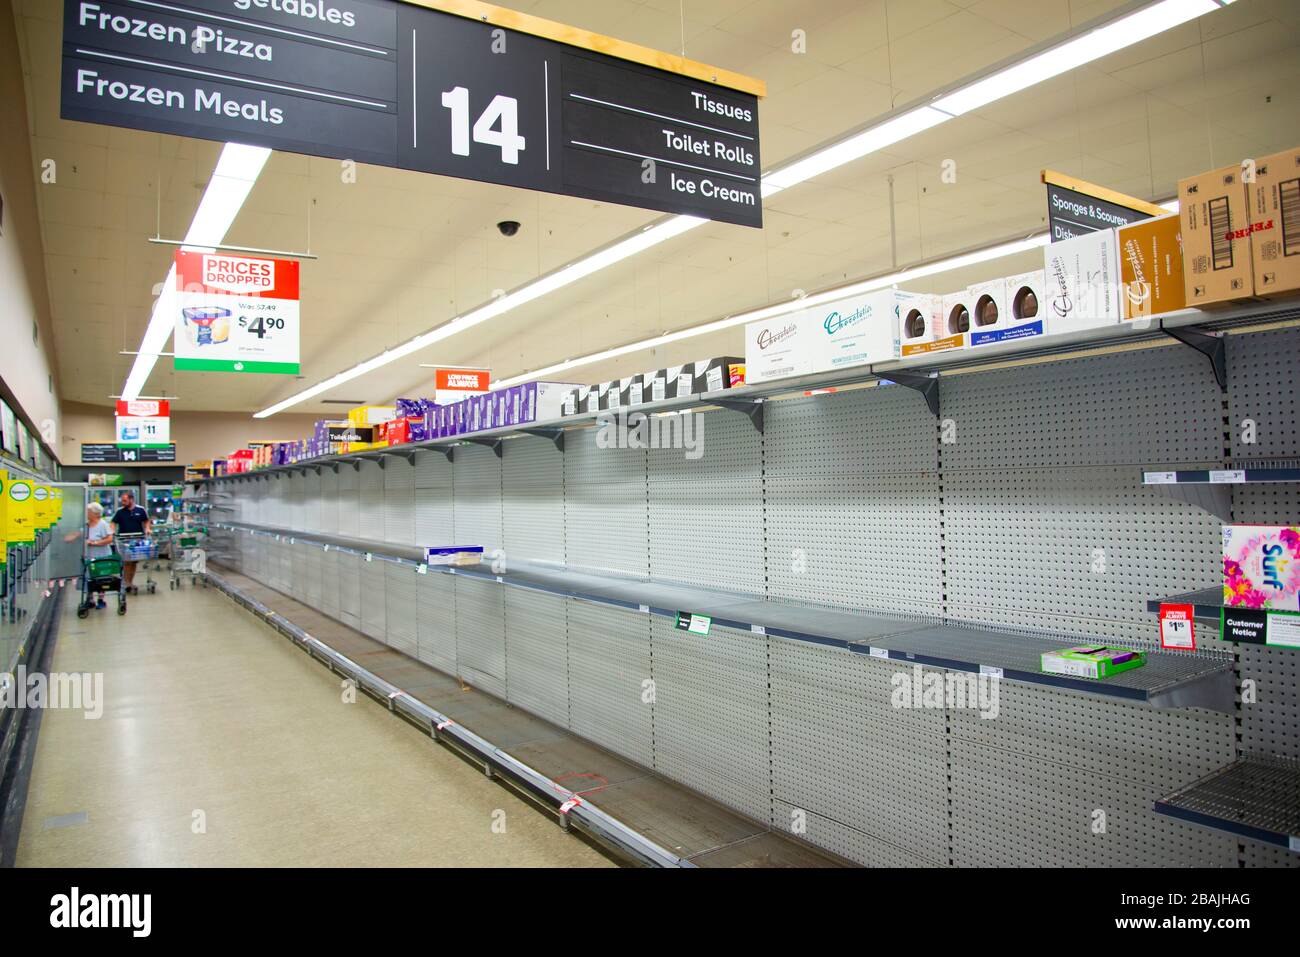 Perth, Australia - March 16, 2020: Supplies shortage at grocery store during the Coronavirus crisis Stock Photo